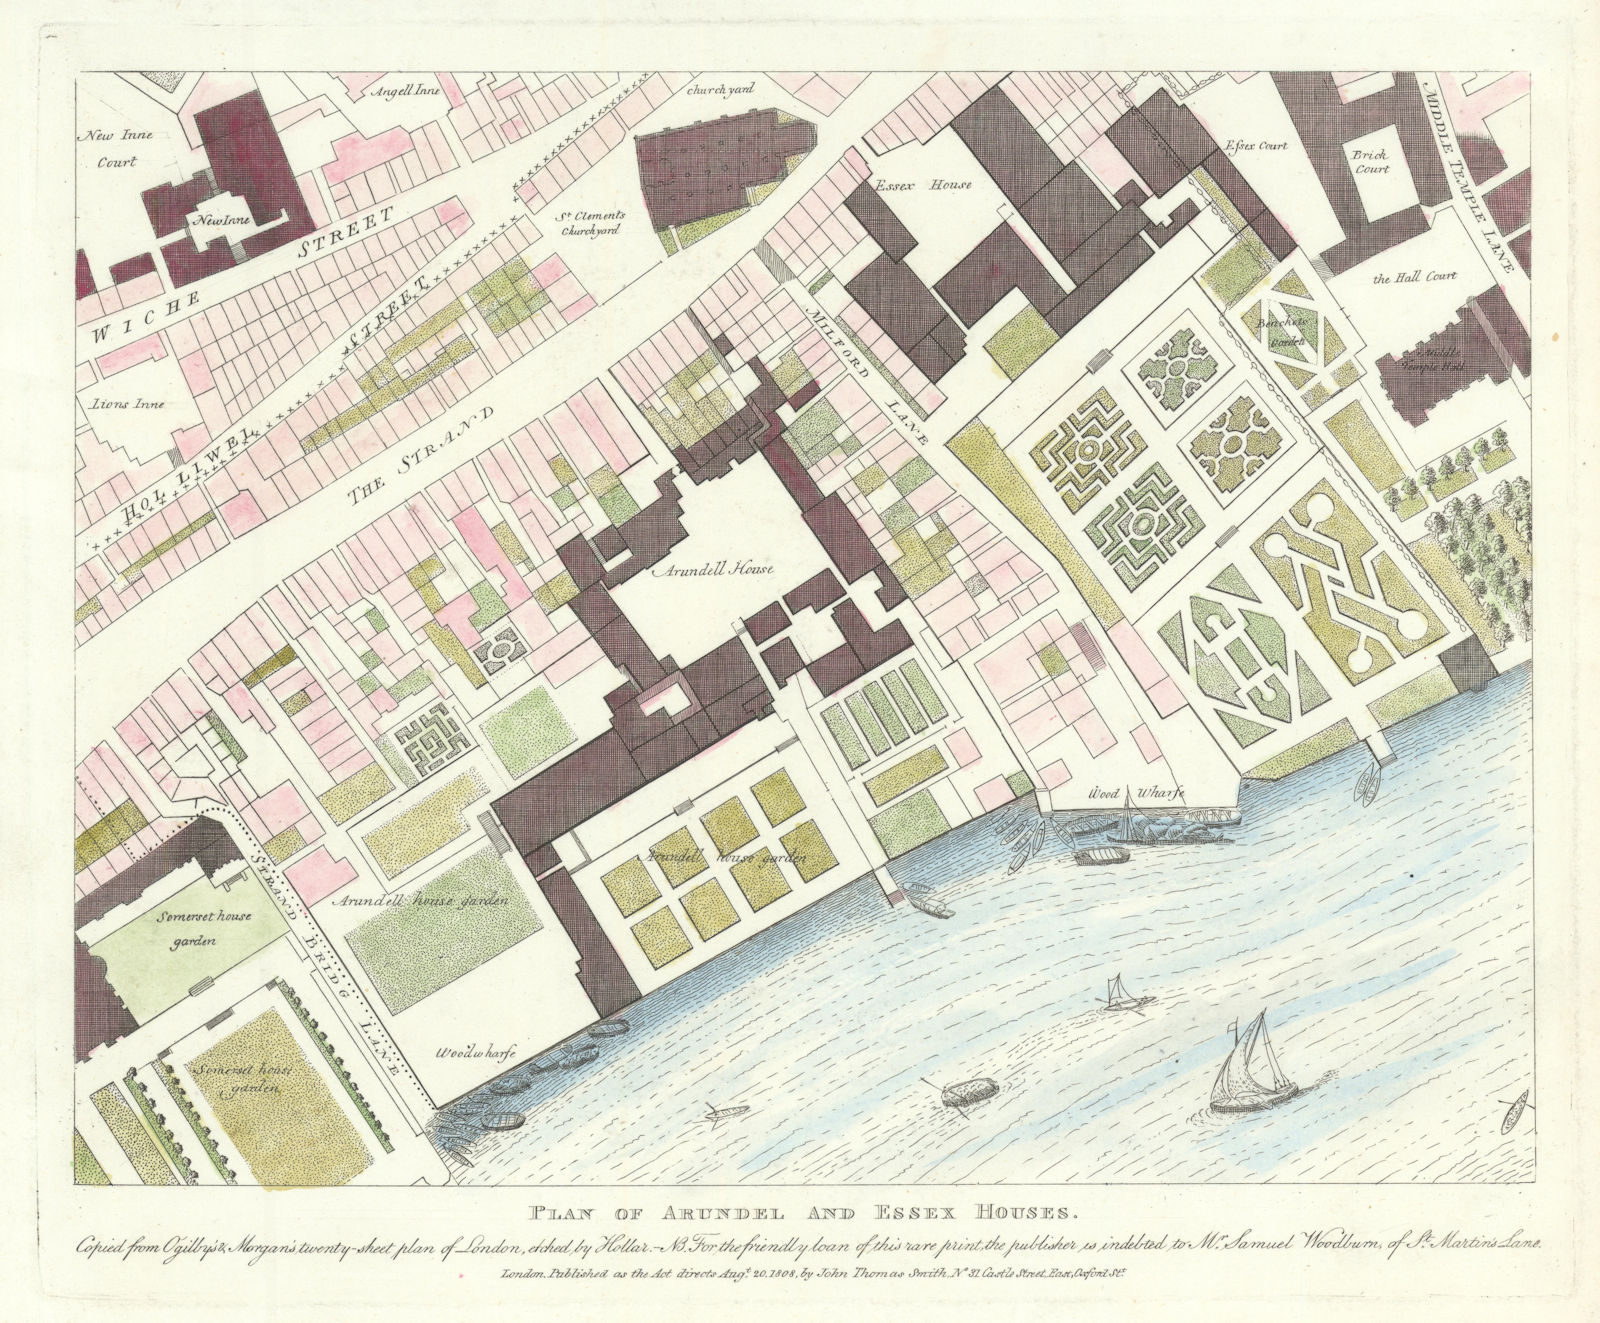 Associate Product Strand. Arundel, Essex & Somerset Houses from Ogilby & Morgan. JT SMITH 1809 map